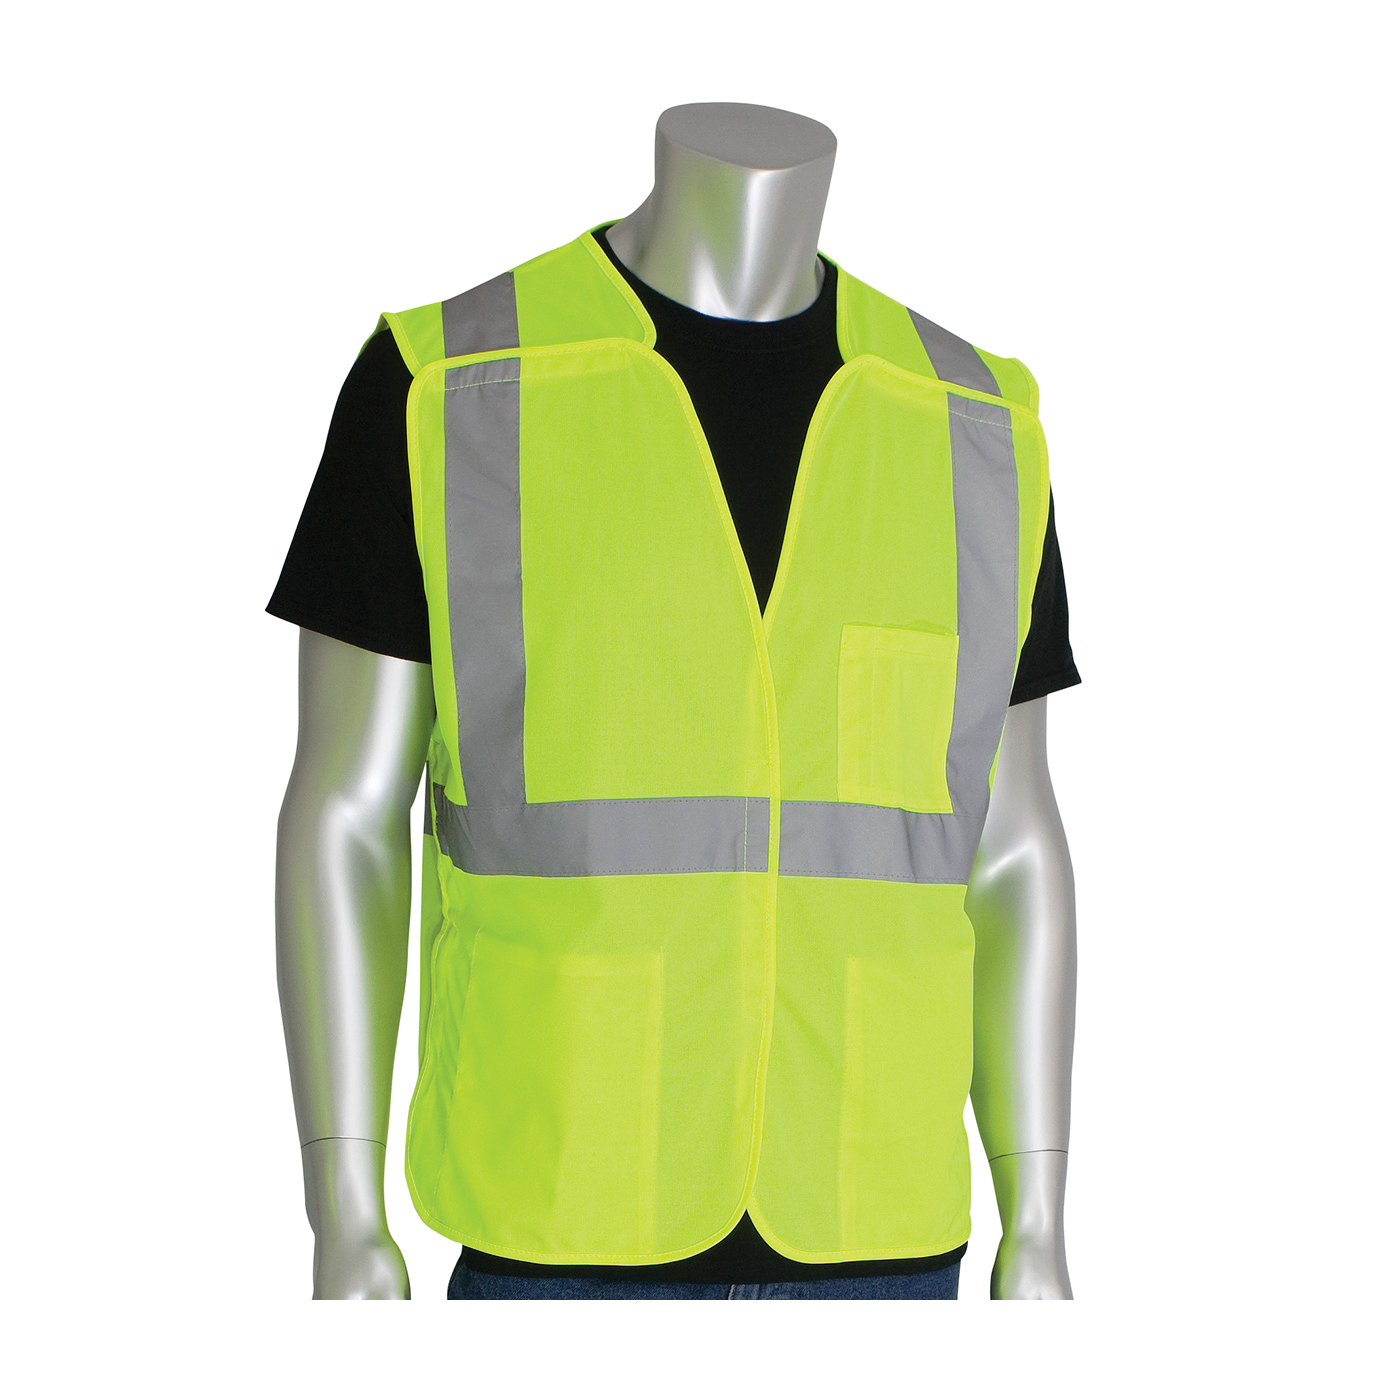 PIP® 302-5PVLY-L Safety Vest, L, Hi-Viz Lime Yellow, Polyester, Hook and Loop Closure, 3 Pockets, ANSI Class: Class 2, Specifications Met: ANSI 107 Type R